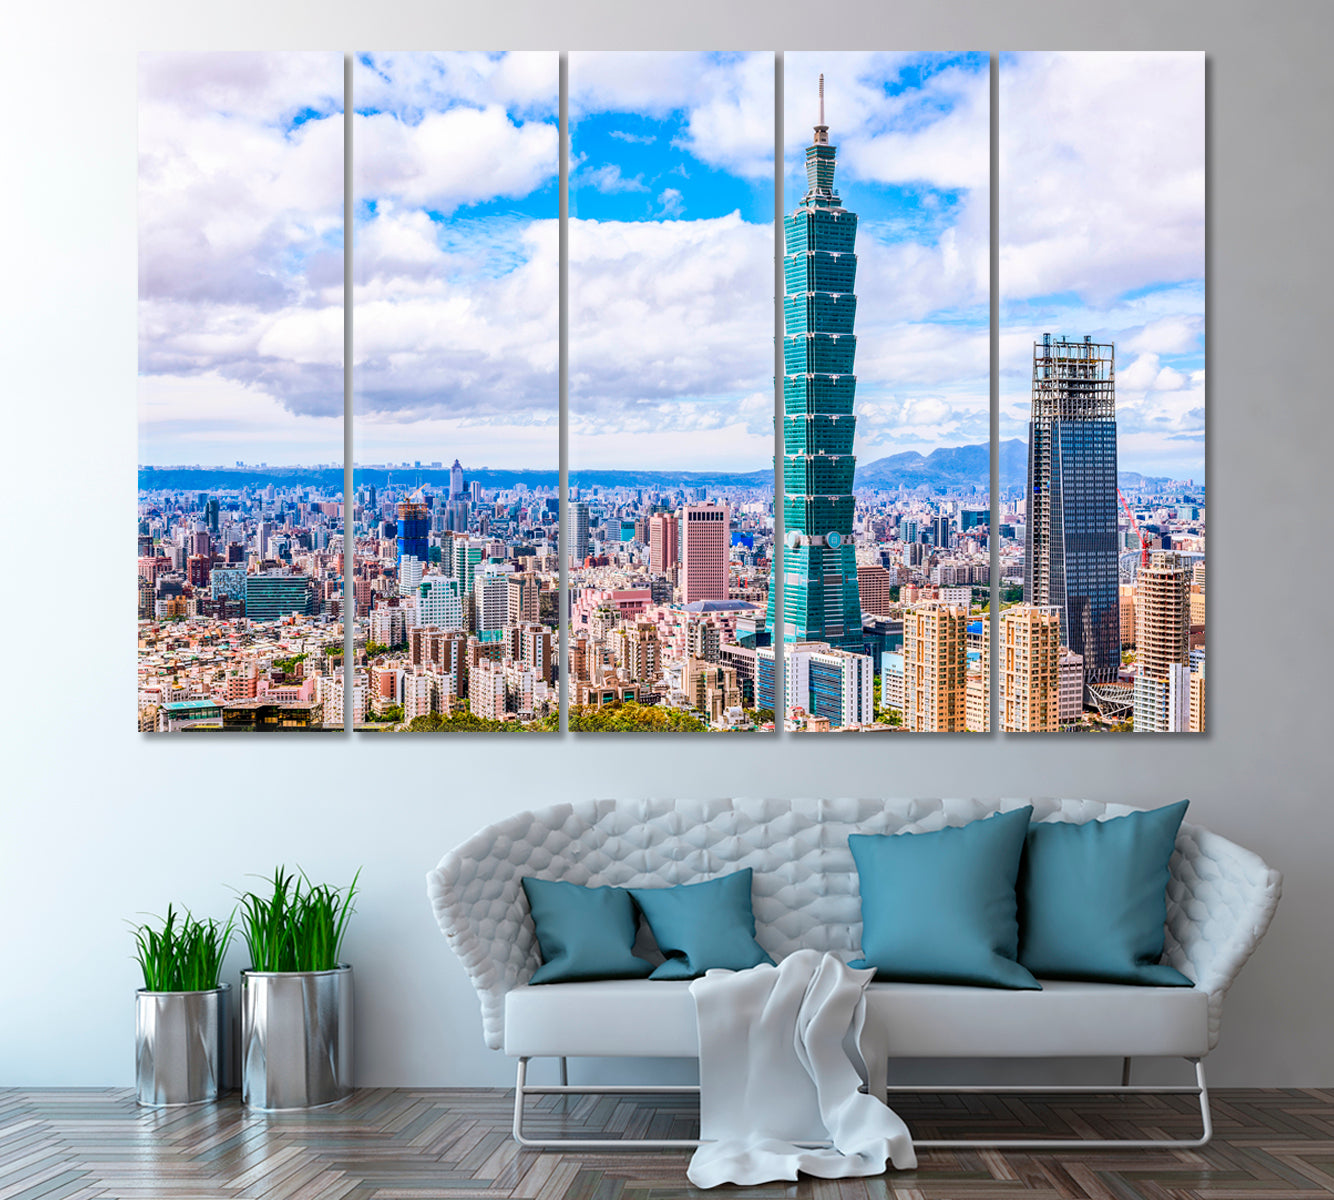 Taipei Downtown with Taipei 101 Skyscraper Canvas Print ArtLexy 5 Panels 36"x24" inches 